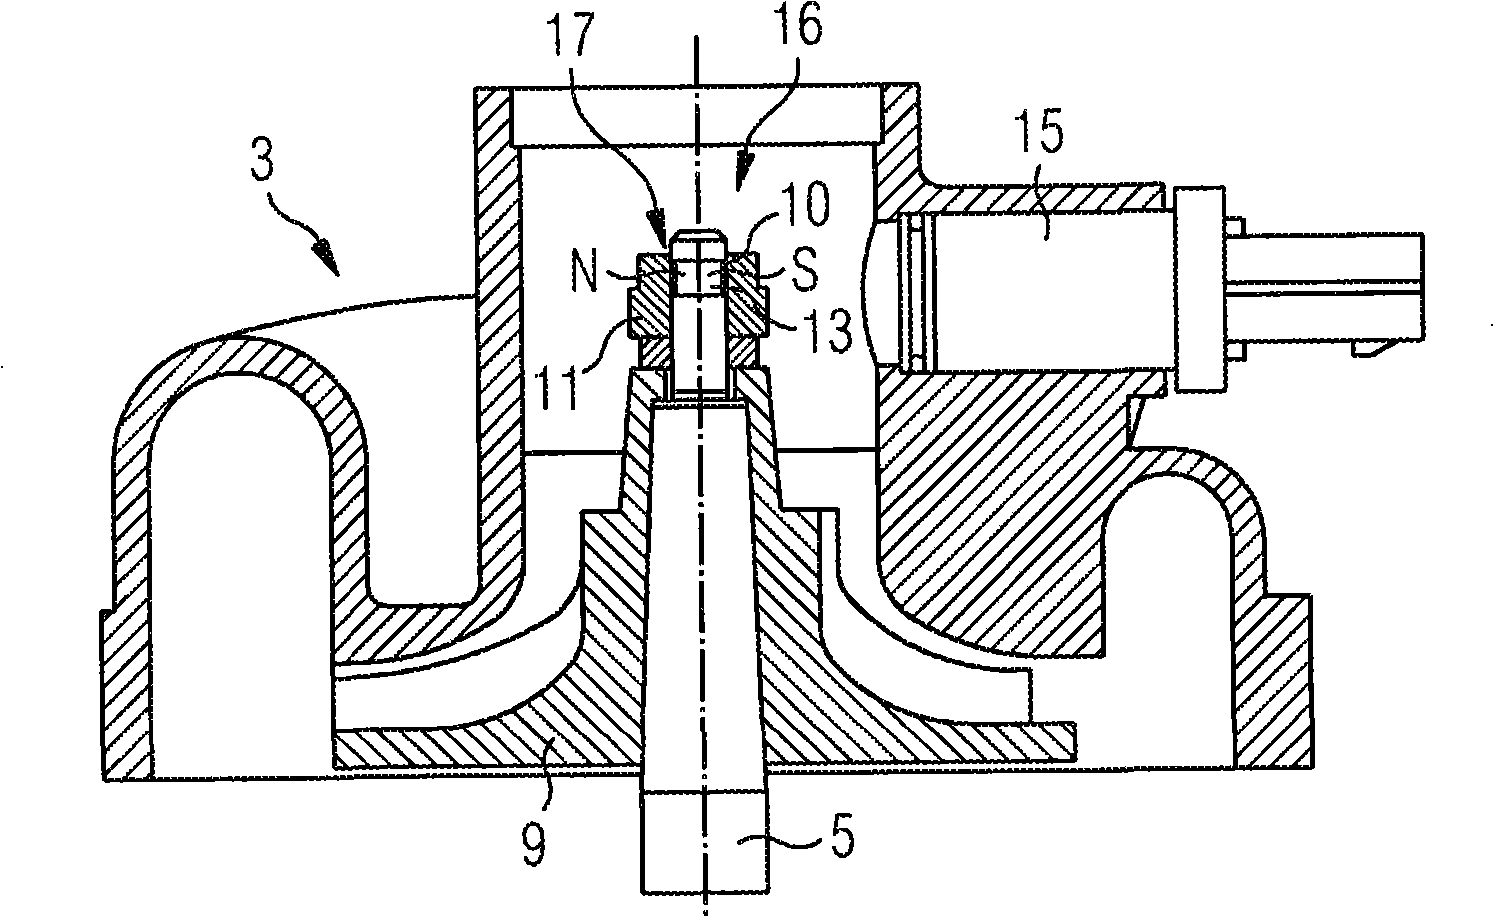 Element for generating a magnetic field